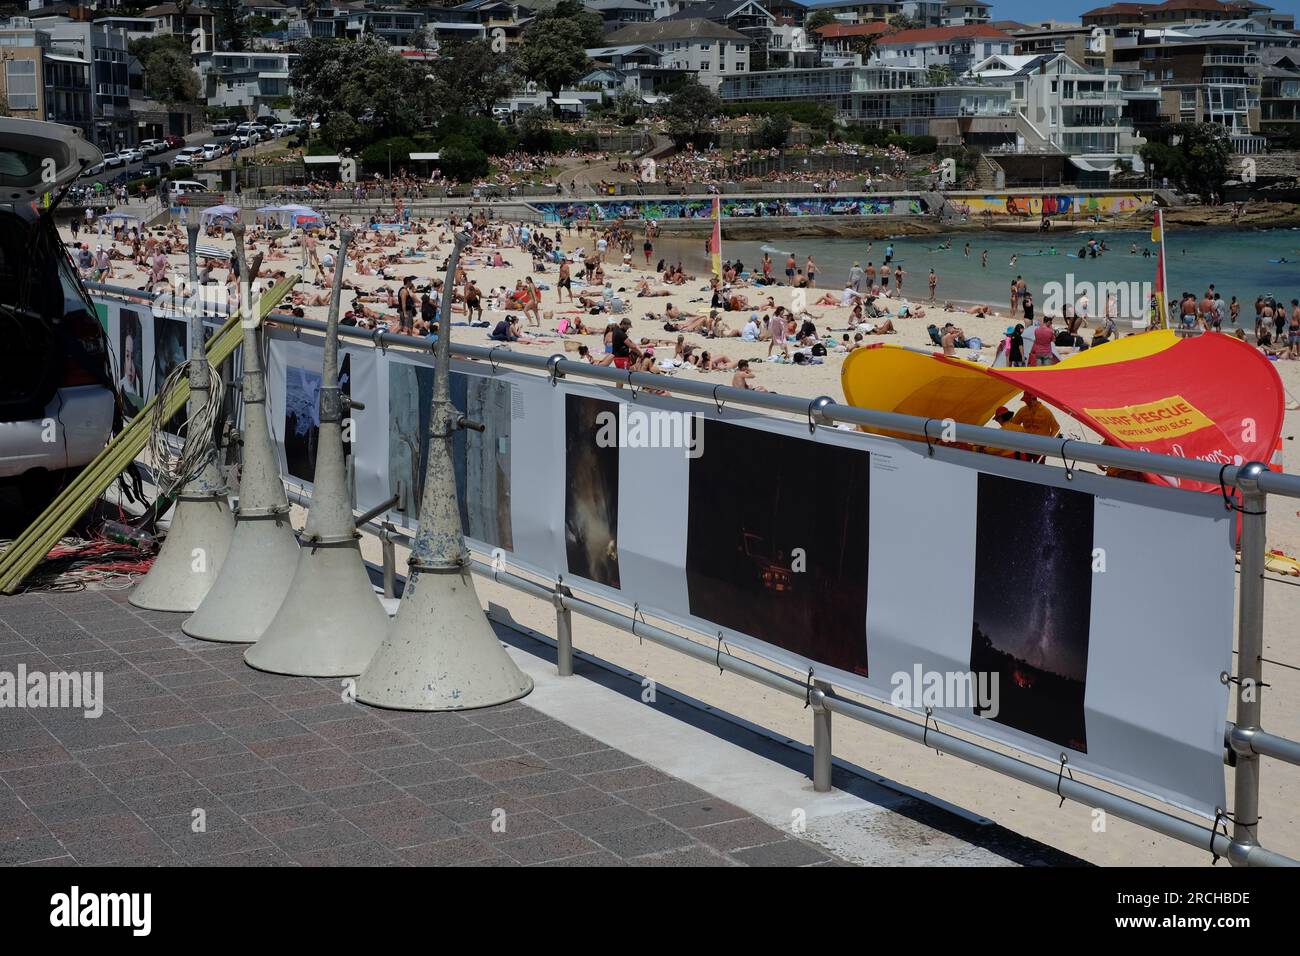 Tannoy speakers on the Bondi beach promenade, people on the beach on a sunny day and the 2022 outdoors head on photography exhibition Stock Photo